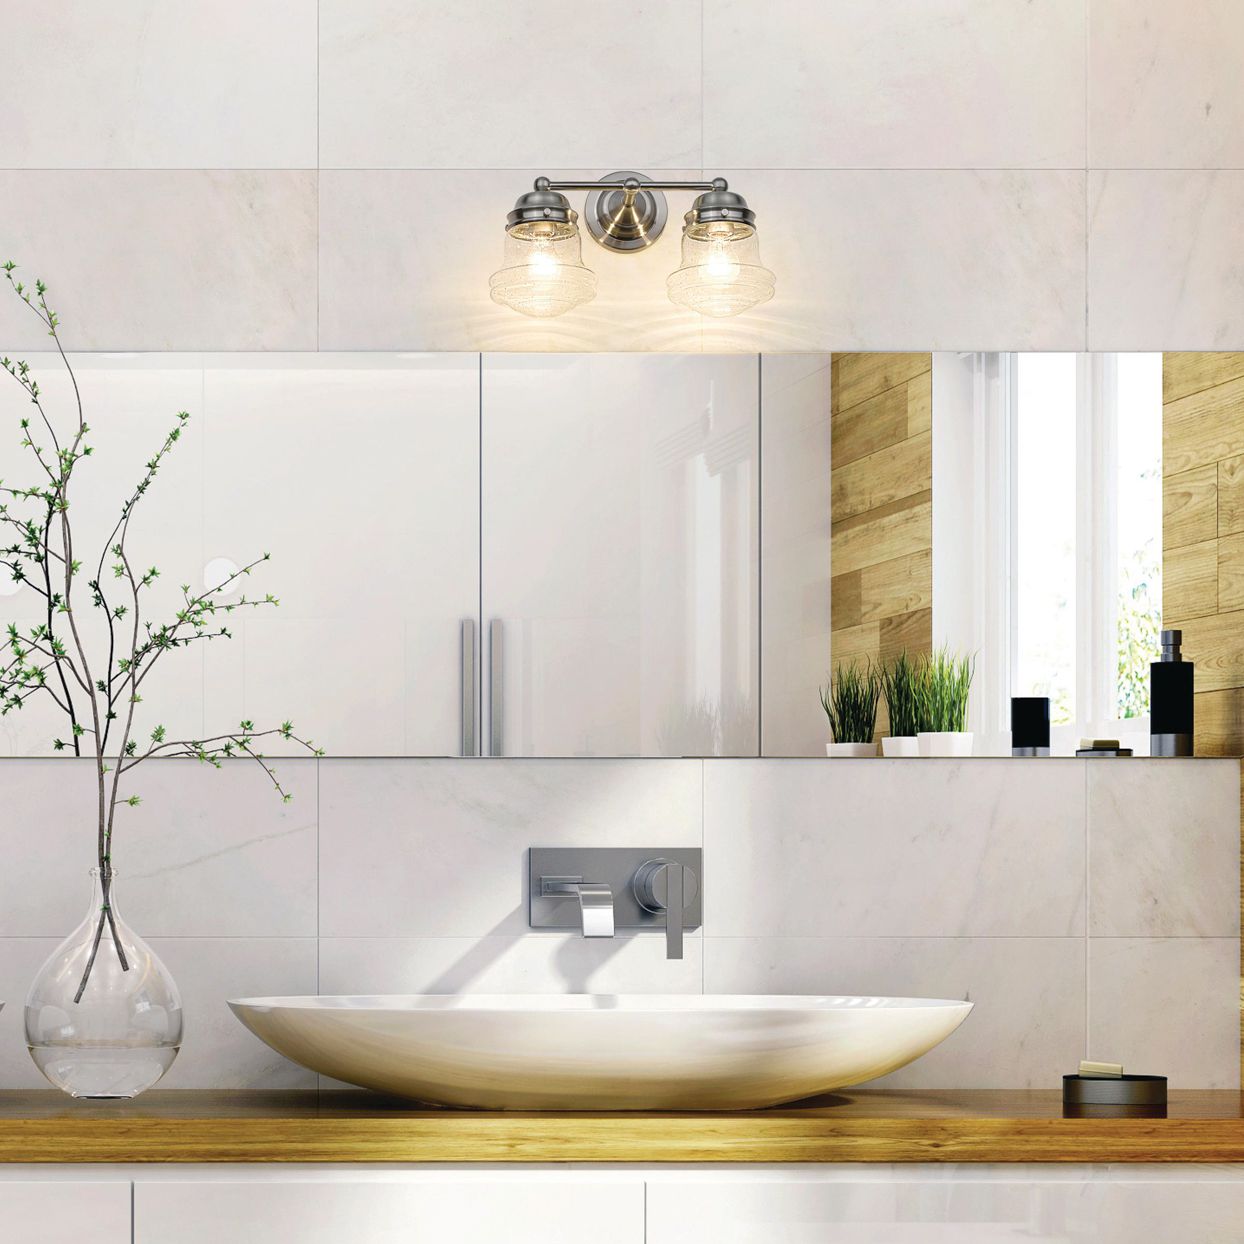 How To Choose The Best Bathroom Vanity Lighting For Your Everyday Routine Better Homes Gardens